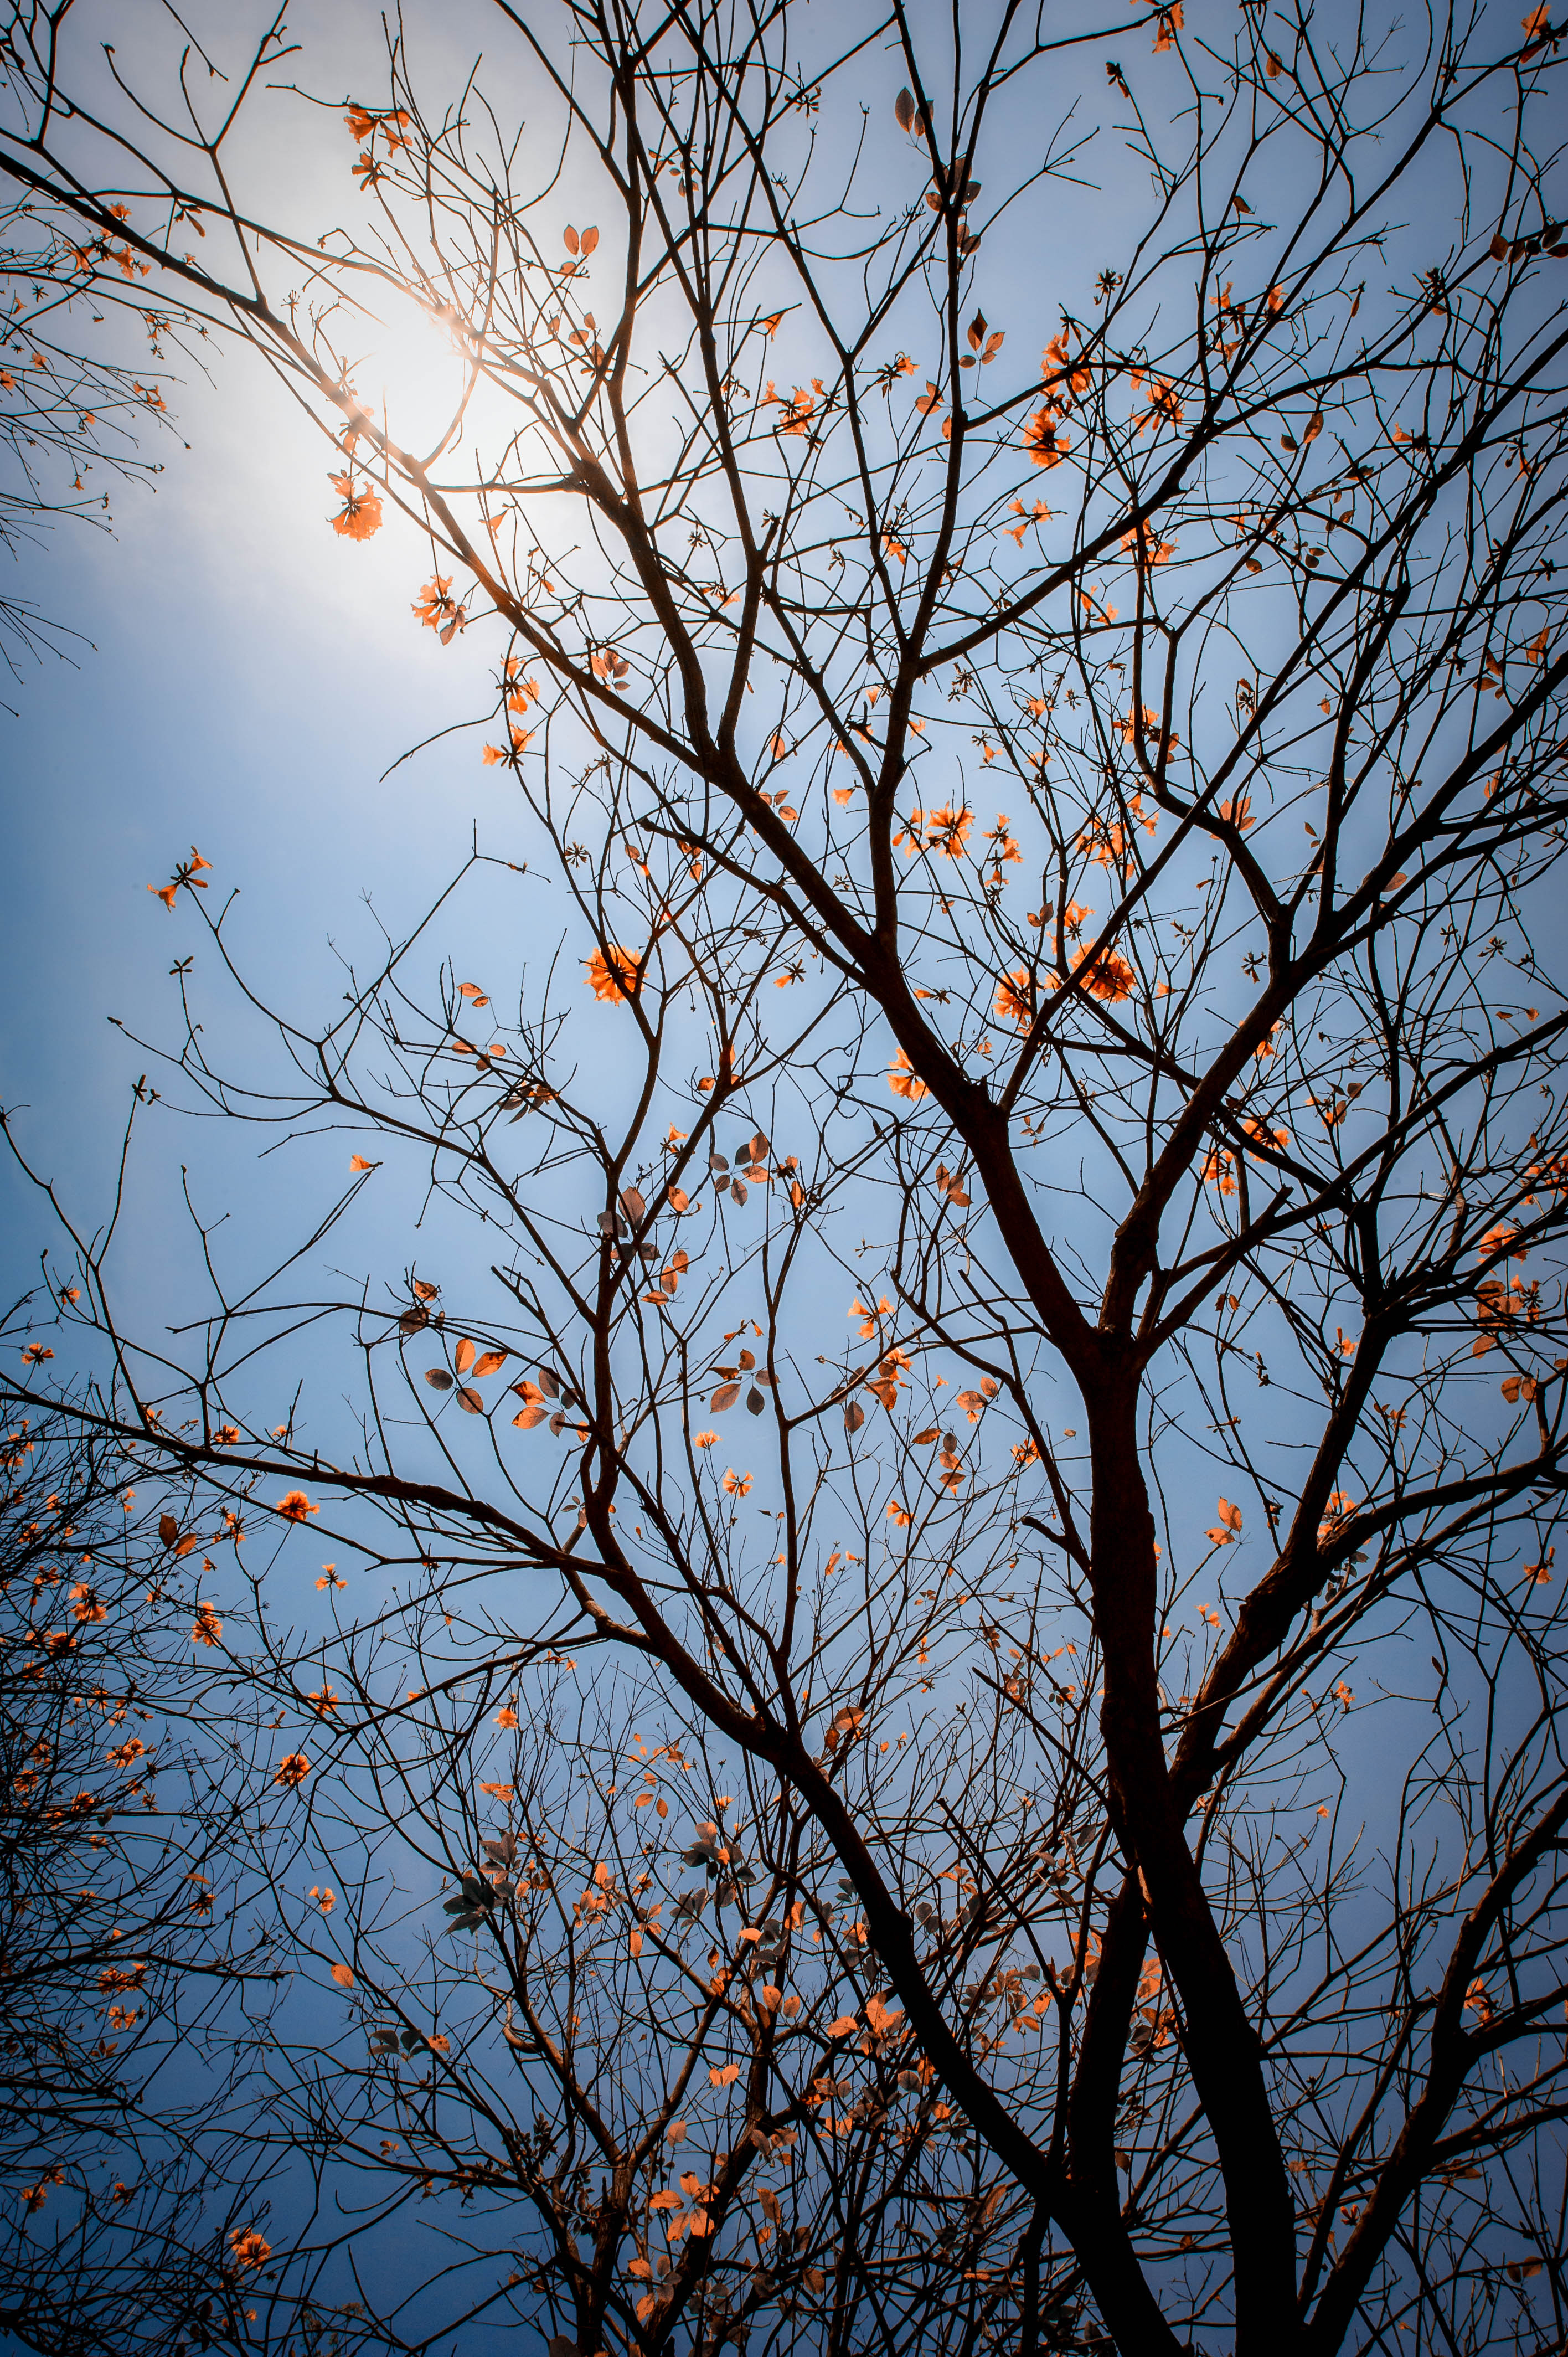 sky, nature, flowers, leaves, wood, tree, branches Full HD